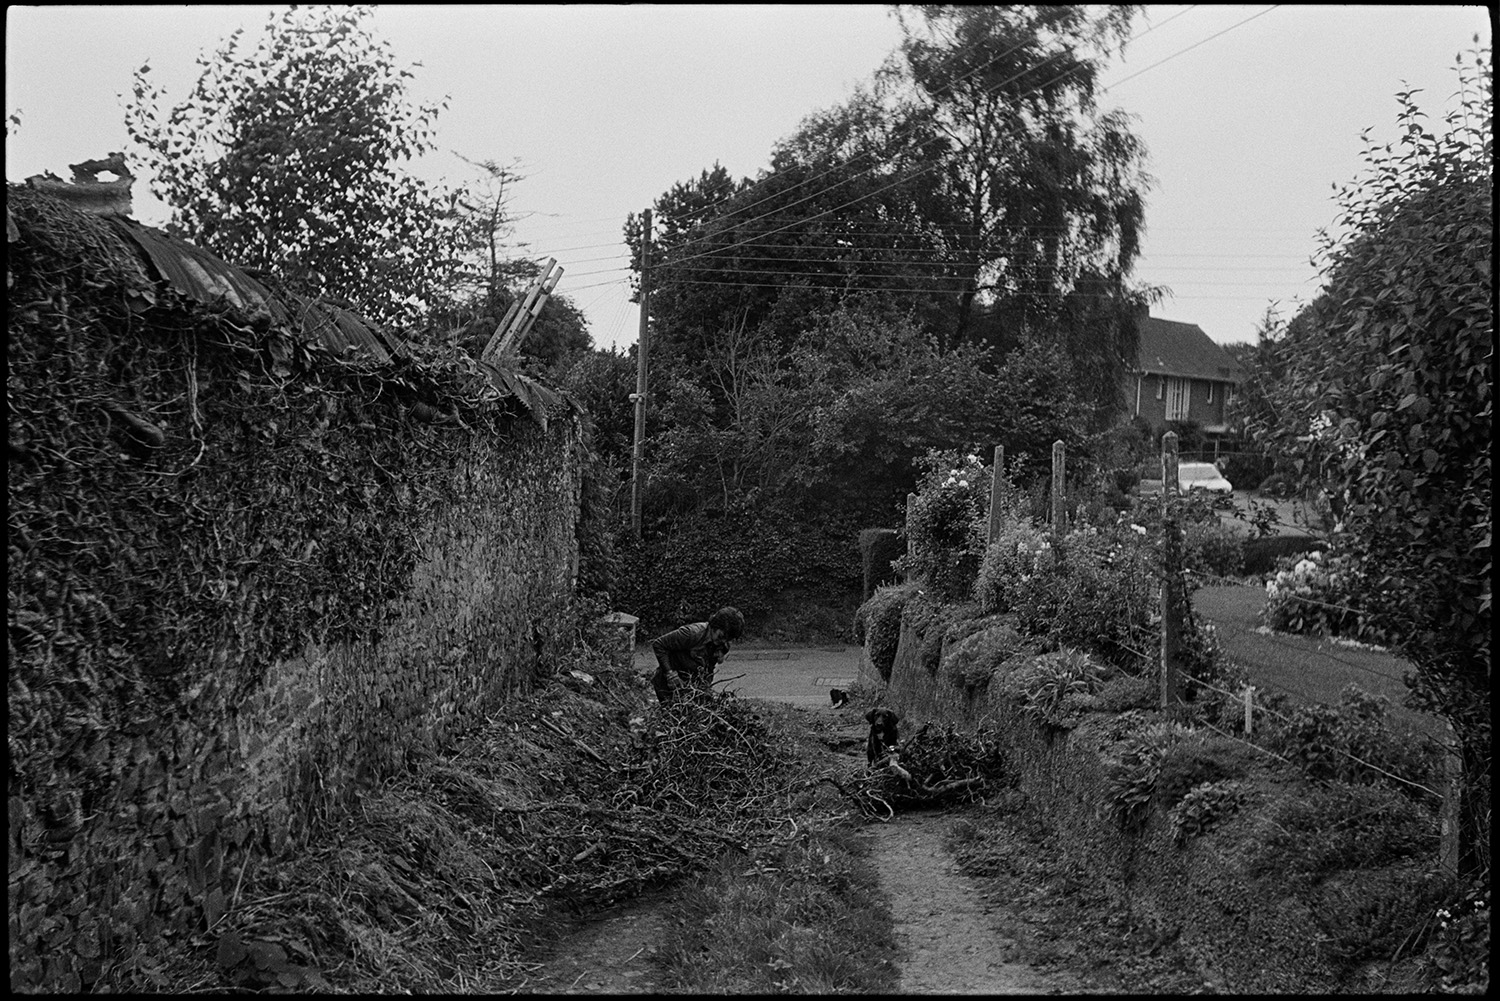 Track which will be made into road if new houses are built as planned. 
[A person clearing undergrowth from a track by a stone wall which was planned to be made into a road for new houses, at South Molton Street, Chulmleigh. A dog is with the person.]